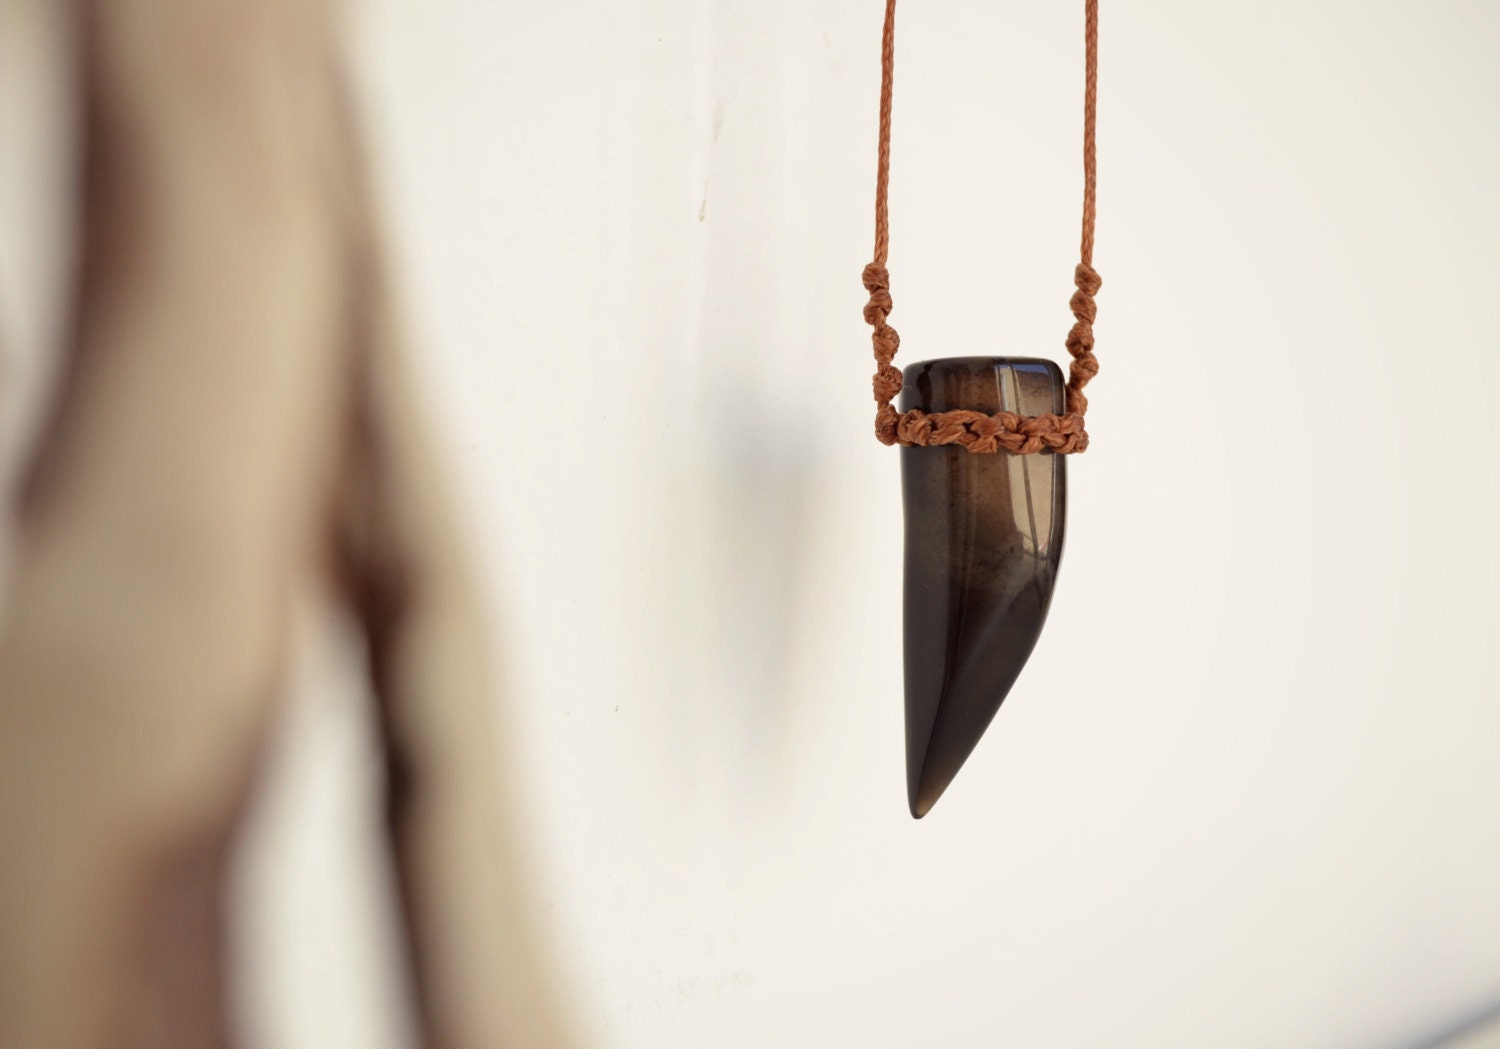 tribal horn necklace, tusk necklace, black agate, good luck necklace, black, brown, tooth talon necklace - colortreasures